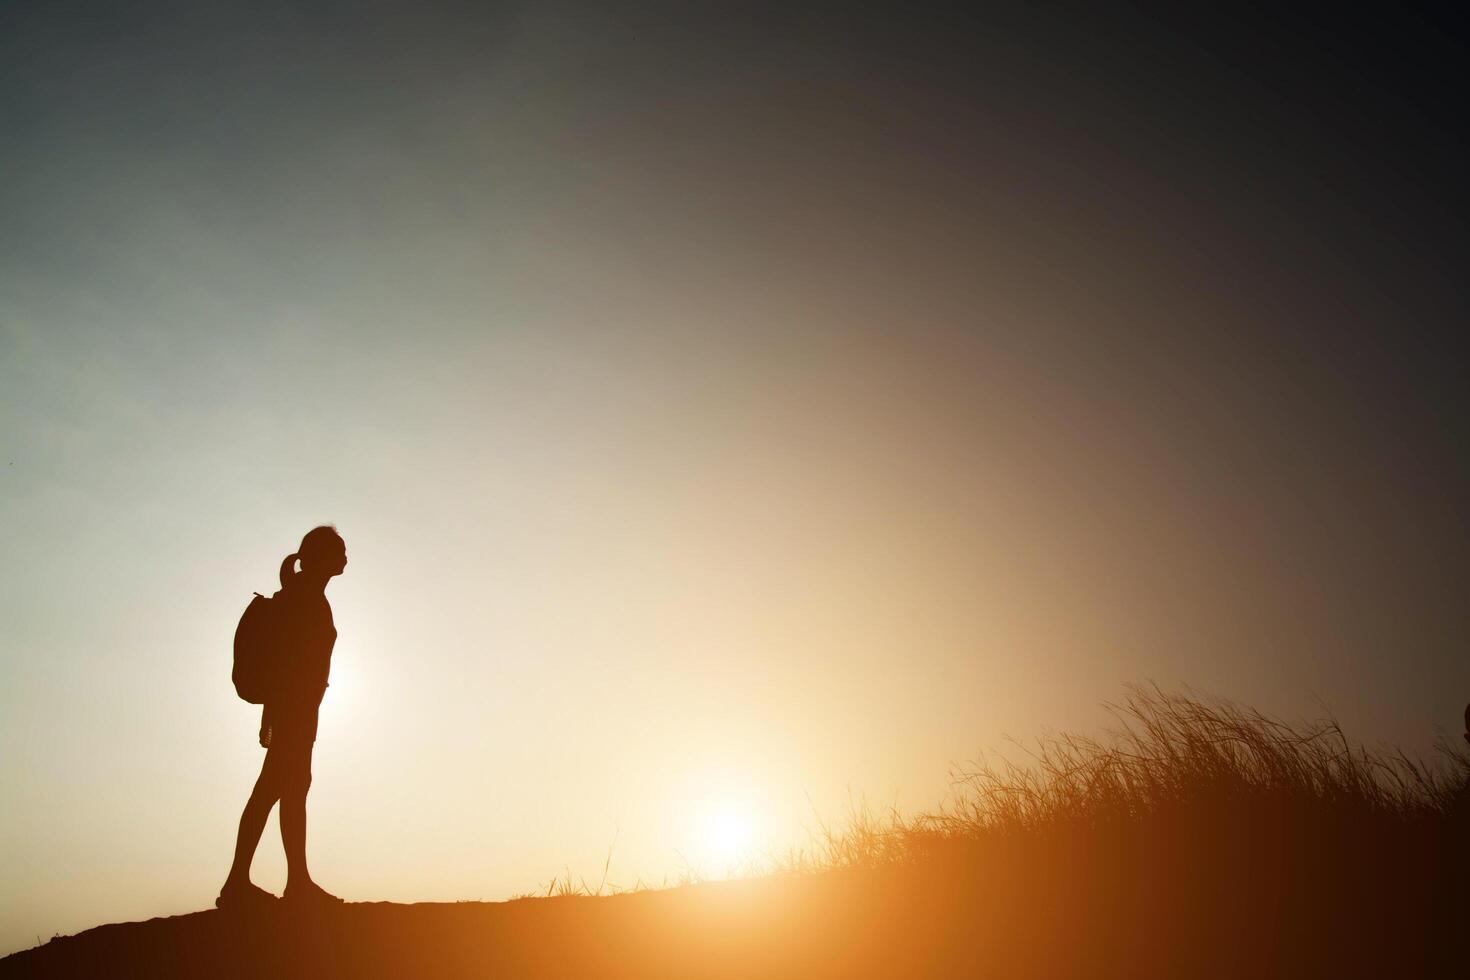 Silhouette of woman backpacking with sunset. photo